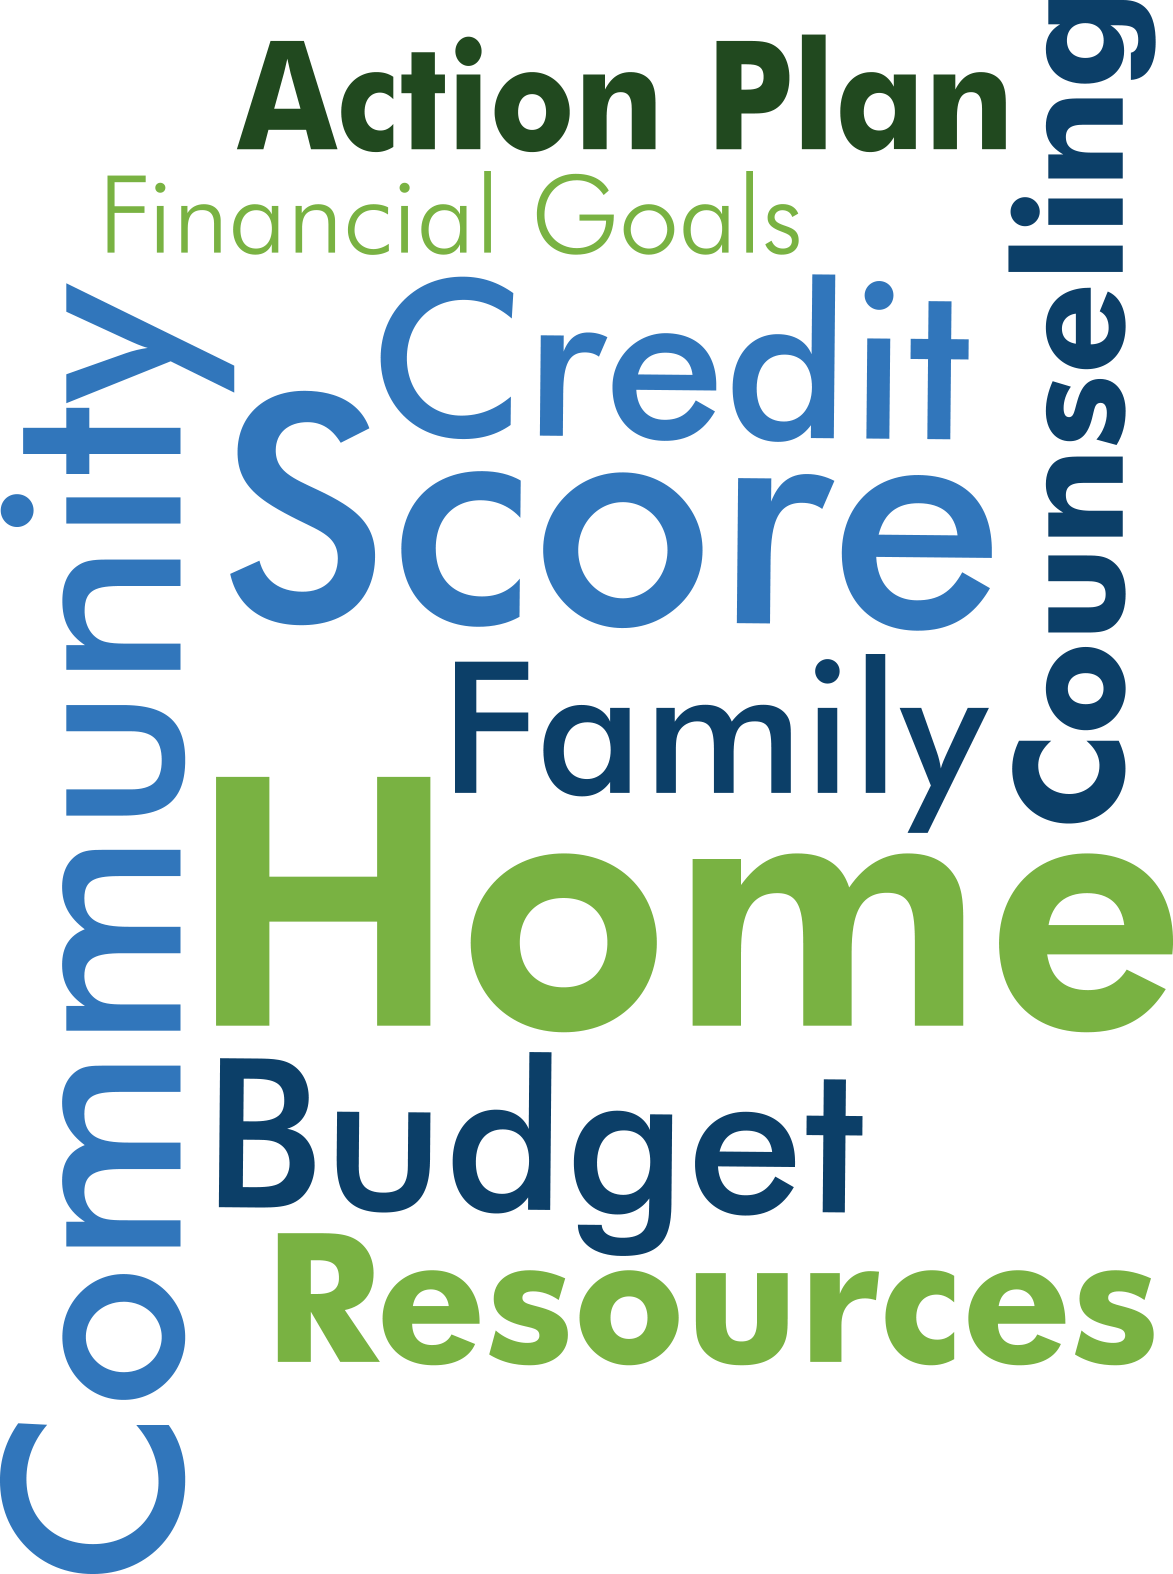 Know various Housing Counseling services, such as knowing your credit score and creating a budget and action plan.